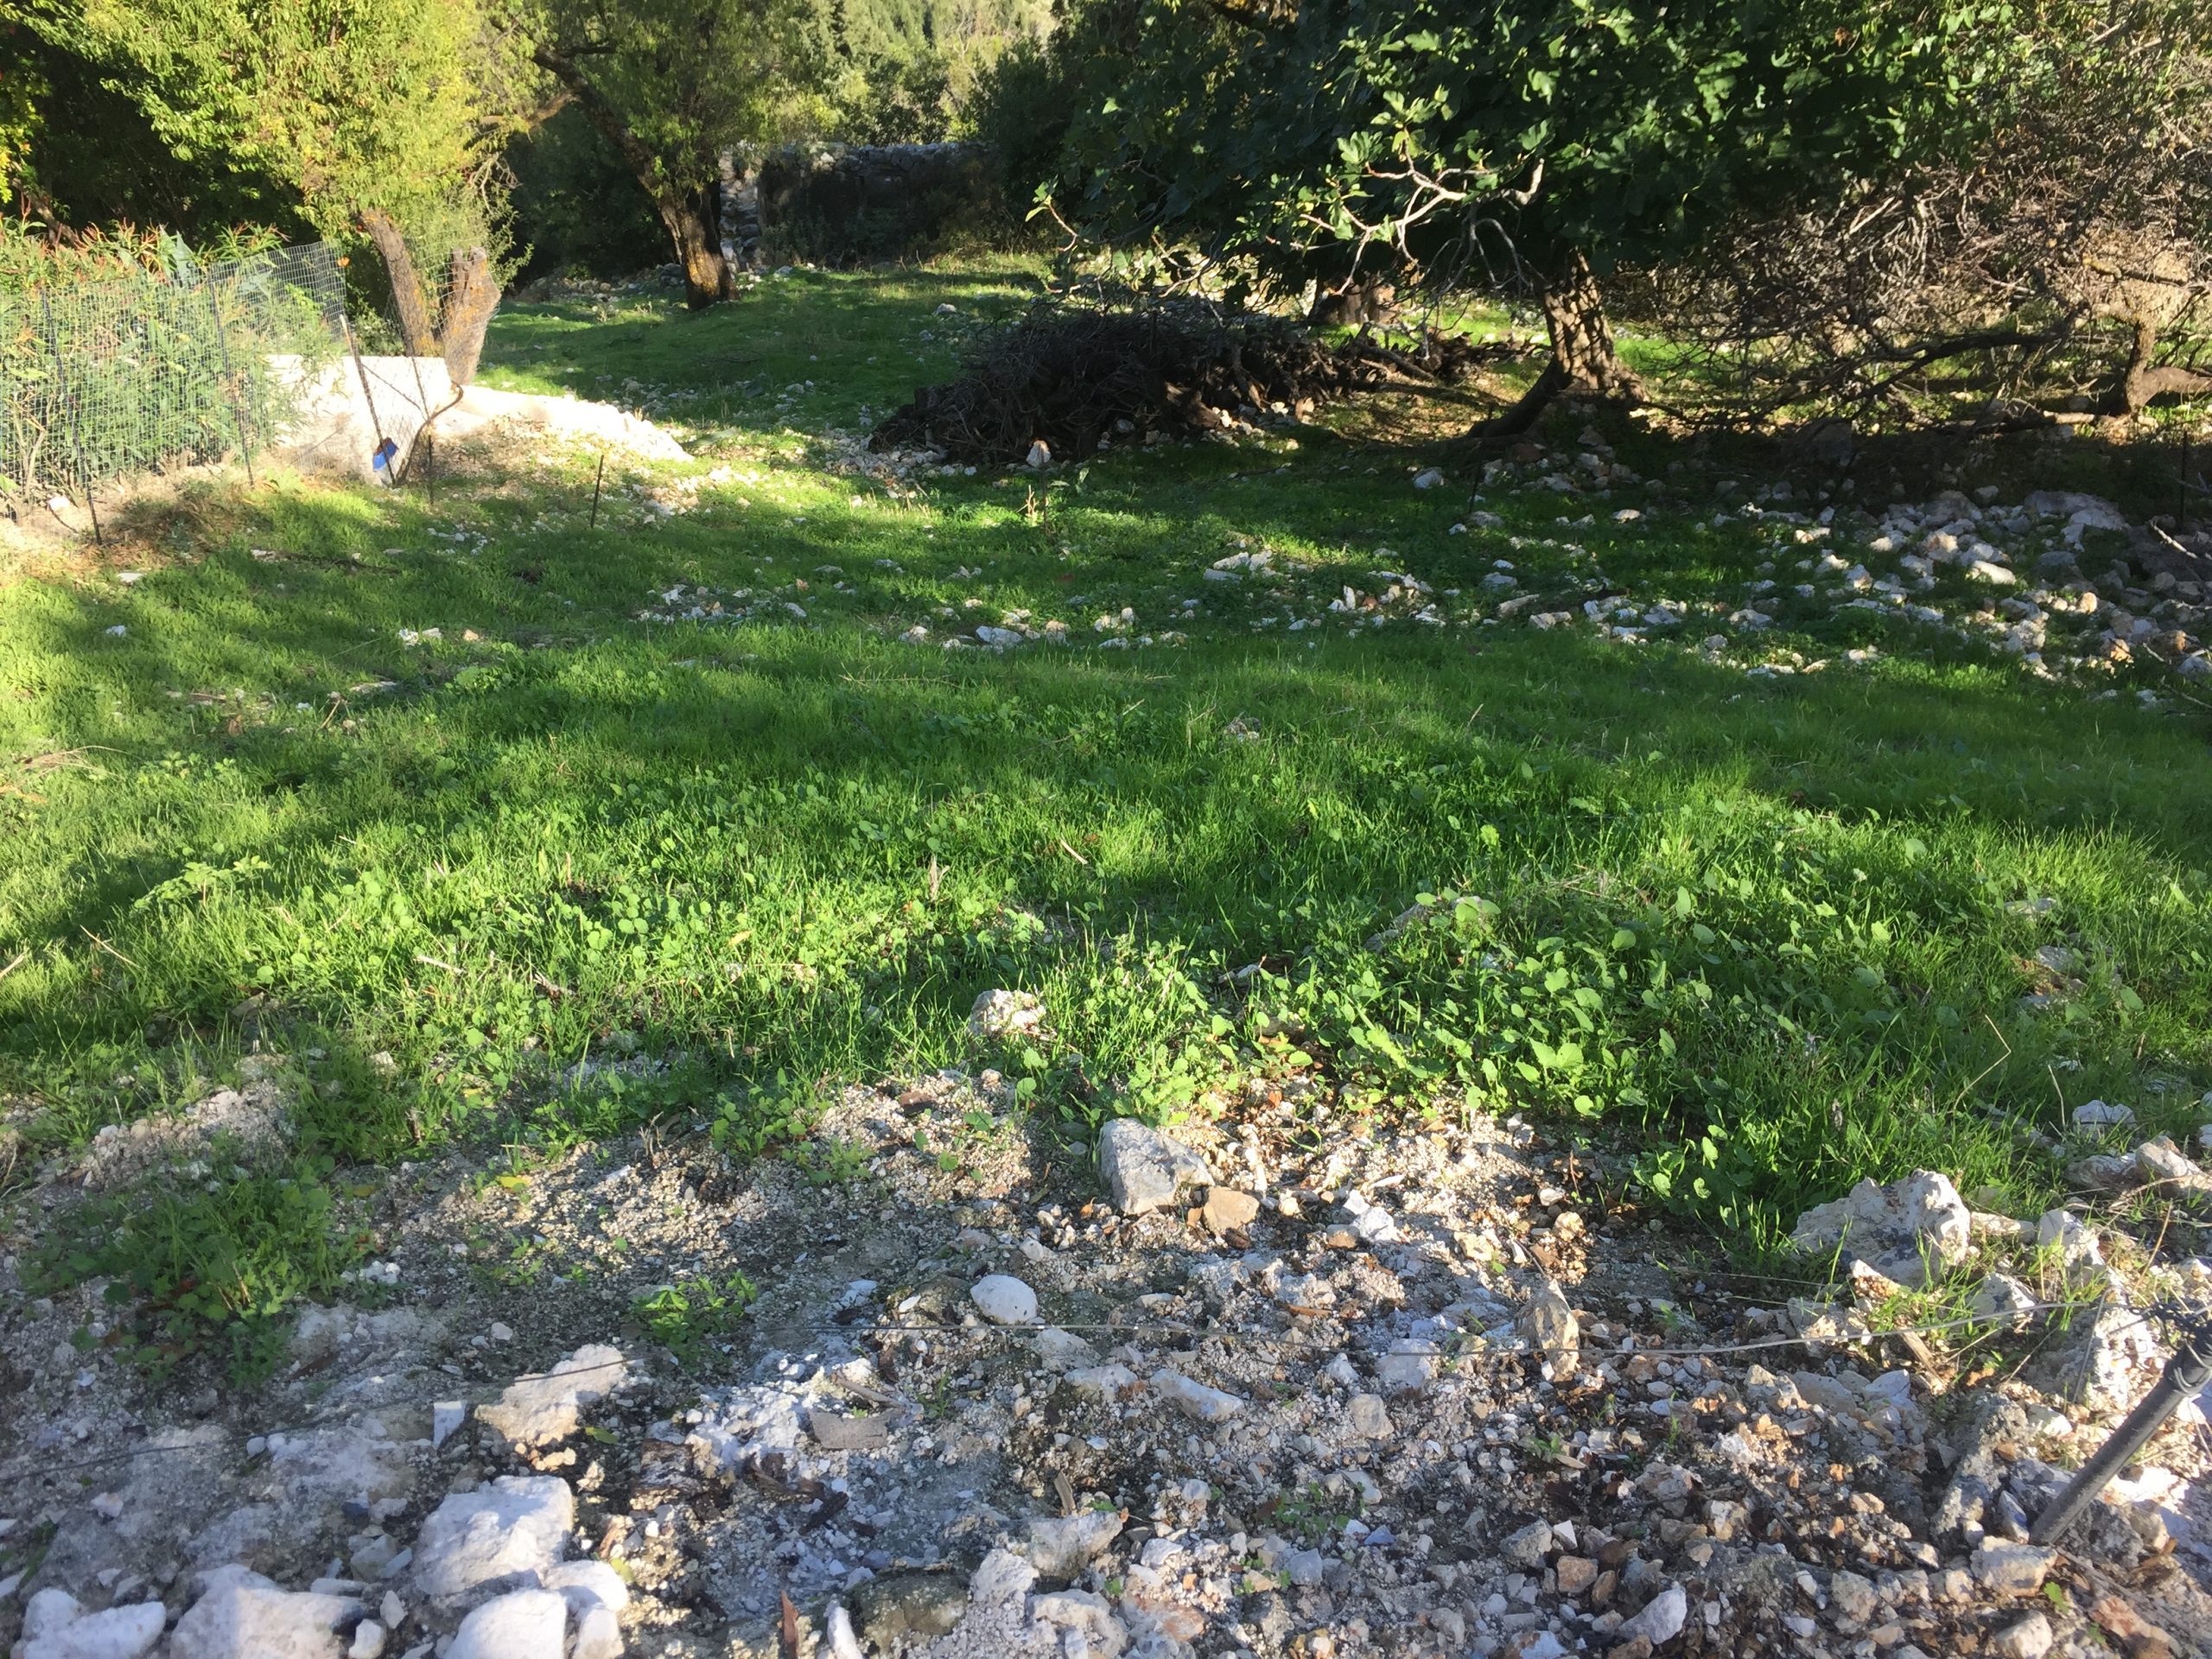 Landscape terrain of land for sale Ithaca Greece Exoghi